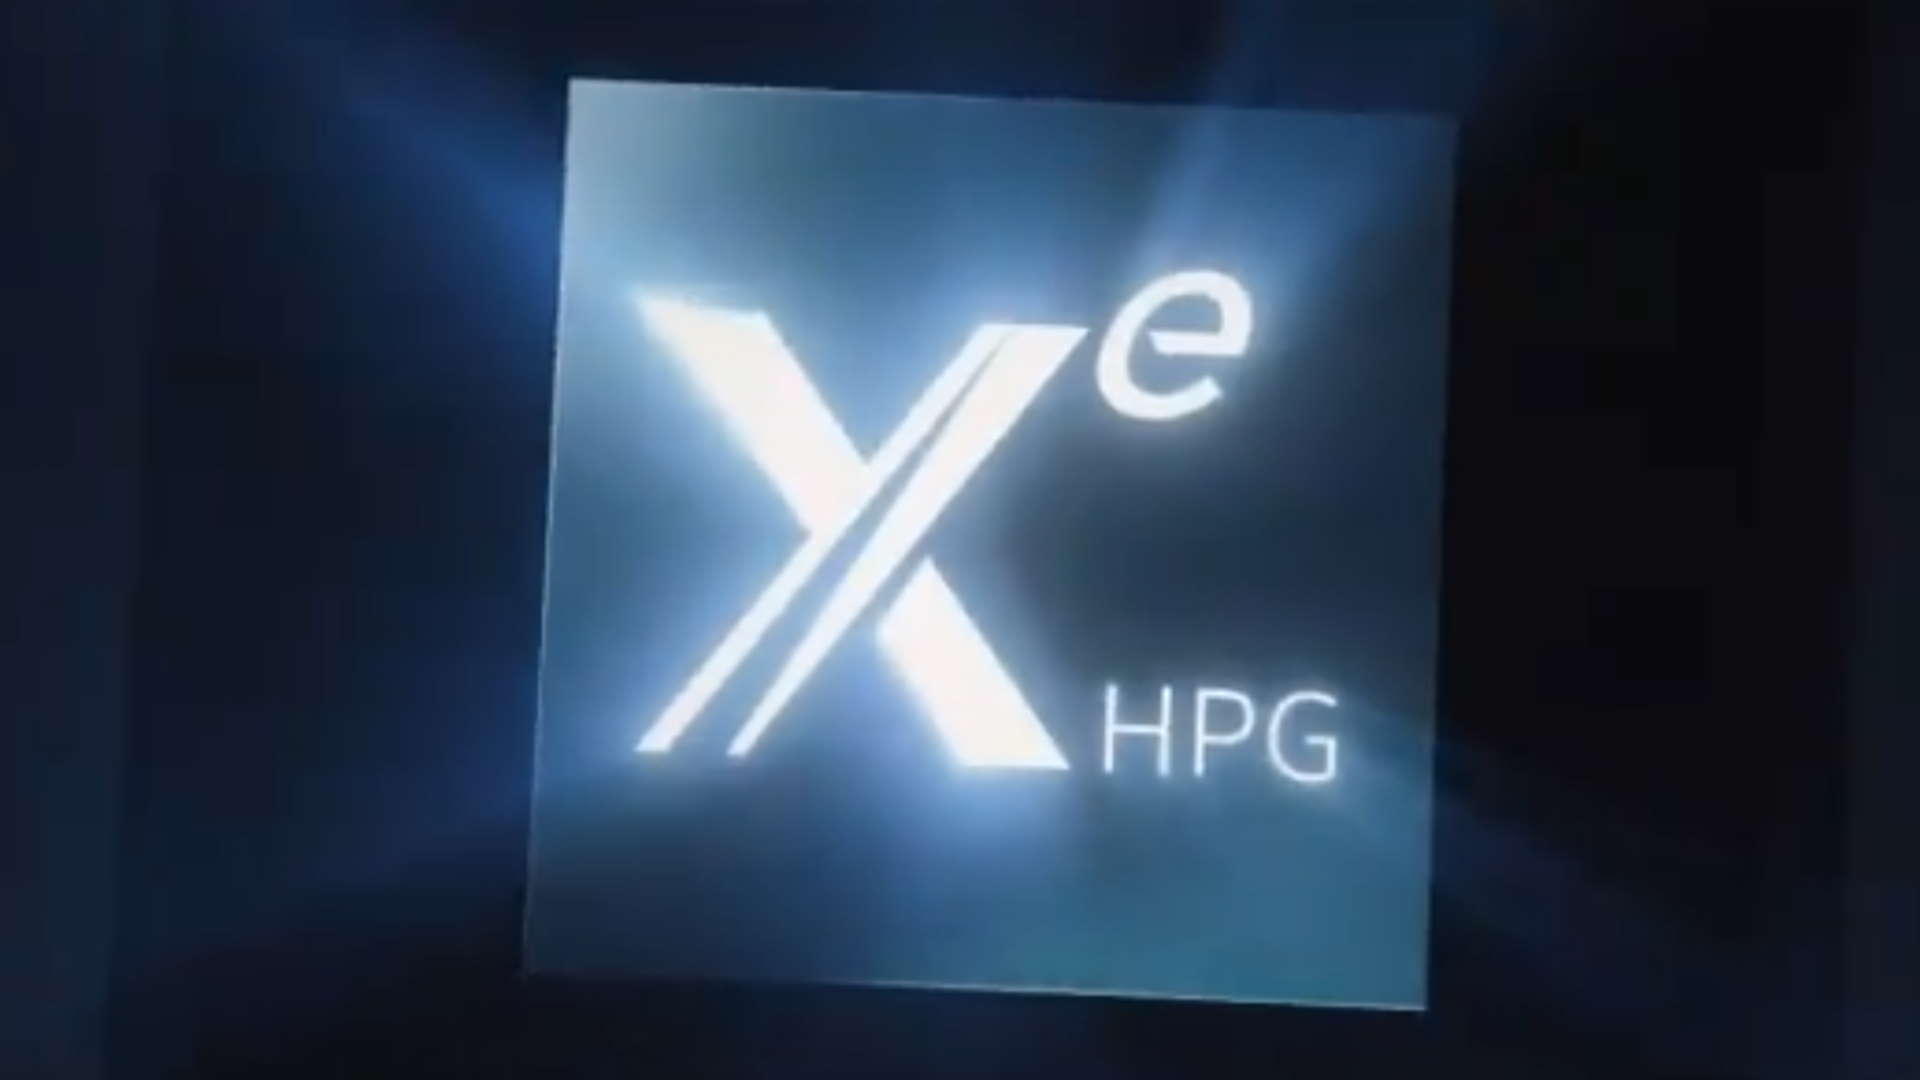 Intel Xe HPG images